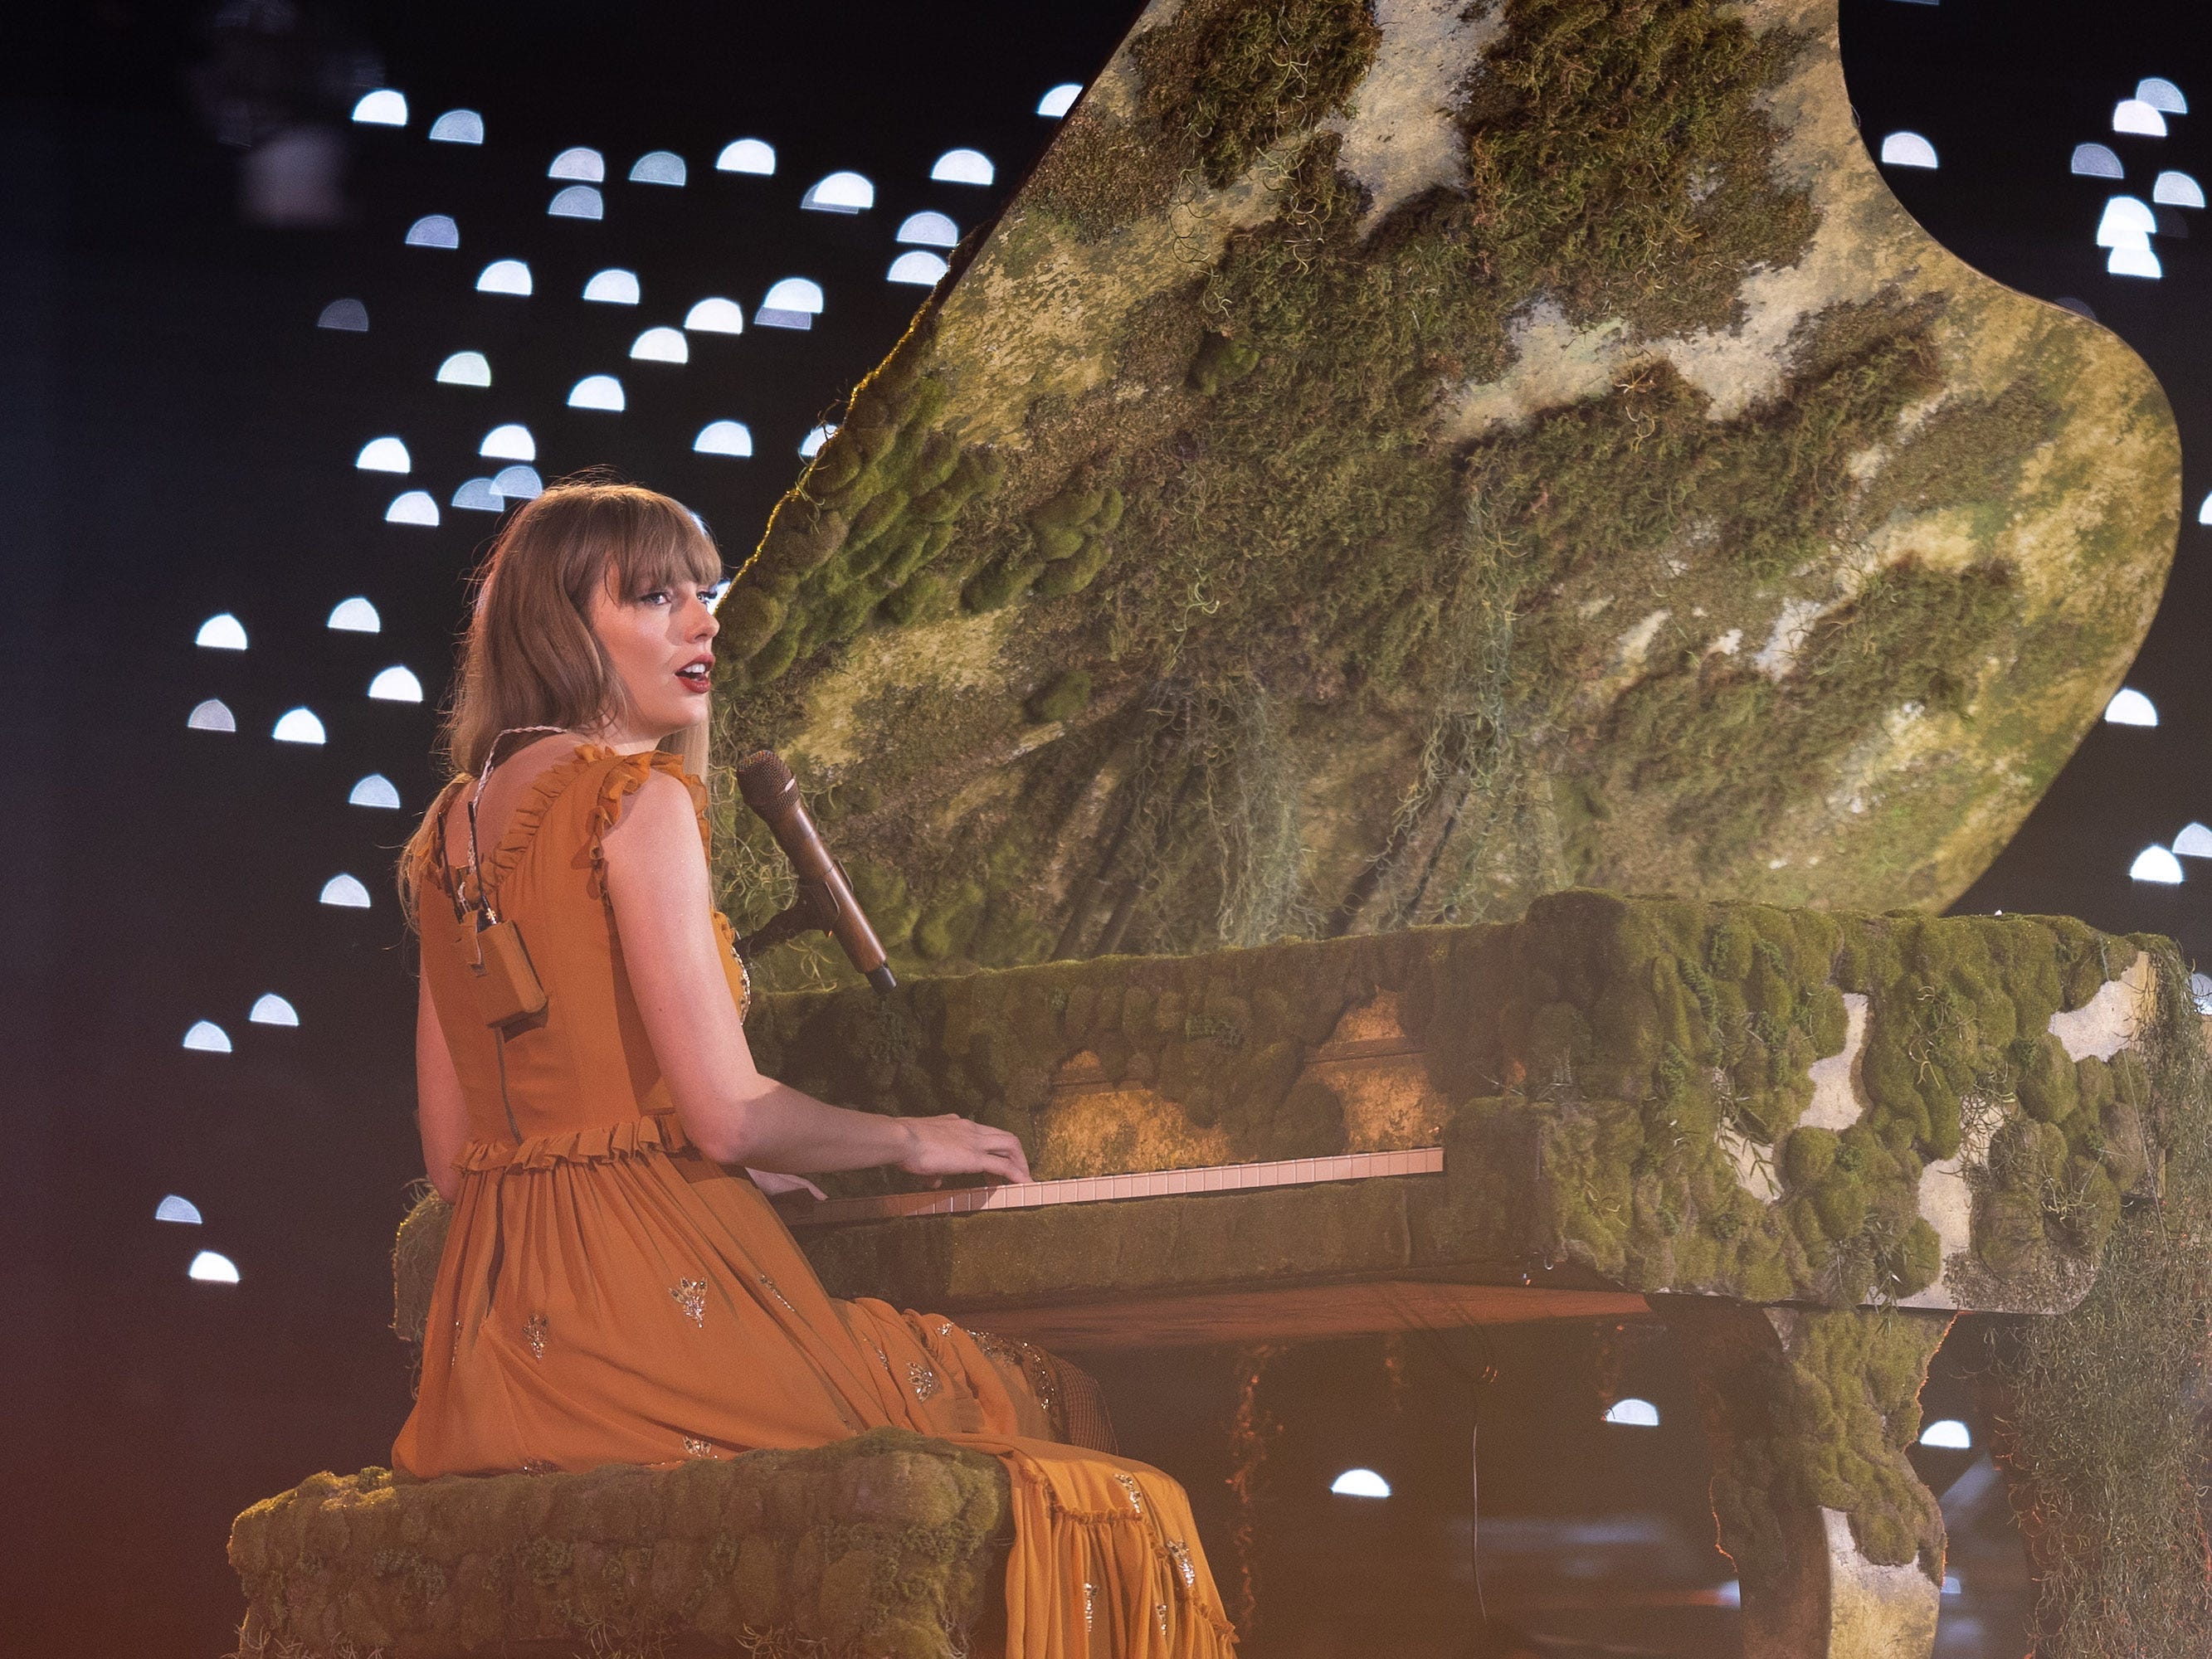 <p>Swift debuted her live version of "Coney Island" in honor of The National. That same day, the band released their ninth studio album, "First Two Pages of Frankenstein," which includes another duet with Swift titled "The Alcott."</p><p>"This band has influenced me beyond my ability to verbalize how much they've influenced me — just lyrically, their ability to set a scene, their ability to tell a story," Swift said onstage, <a href="https://www.spin.com/2023/04/taylor-swift-pays-tribute-the-national-coney-island/" rel="noopener">per Spin magazine</a>.</p>